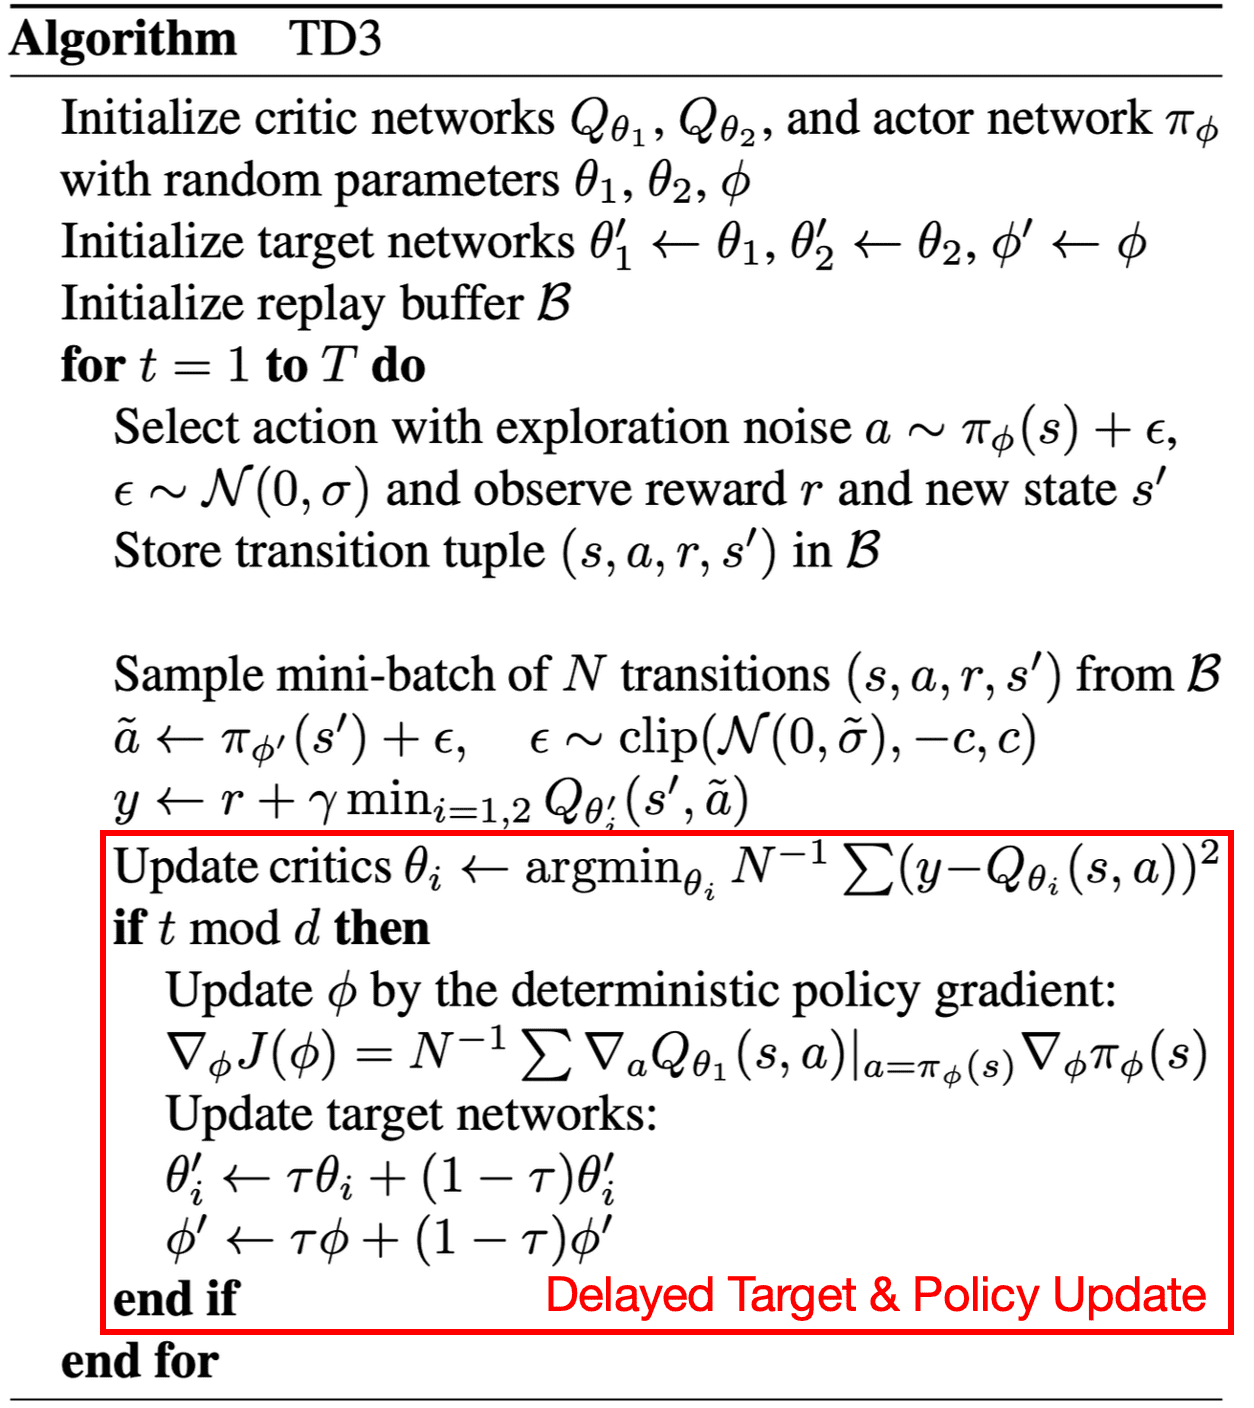 Pseudocode for TD3: Delayed Target and Policy Updates